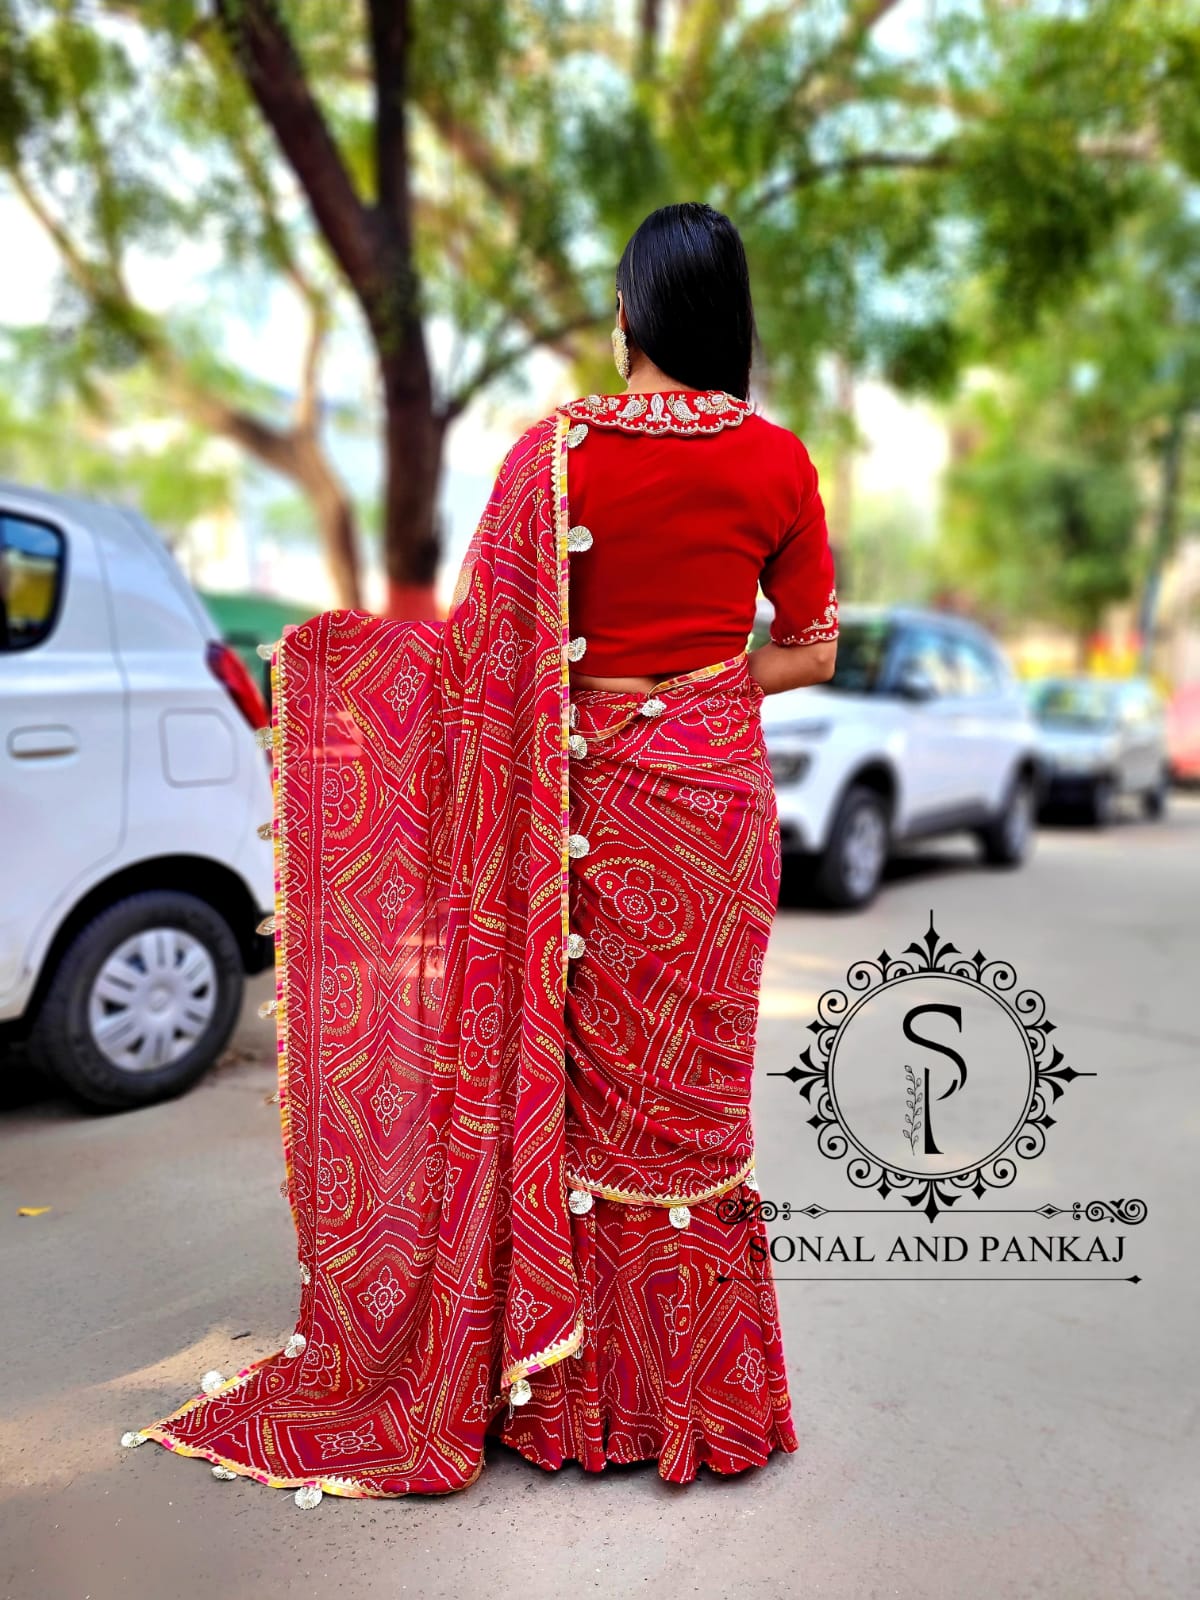 Velvet bridal saree by BEHULI Can be customized in any color of your choice  Dm for more details #velvetblouse #chaubandi #handwork #velvetsaree #saree...  | By Behuli the BoutiqueFacebook